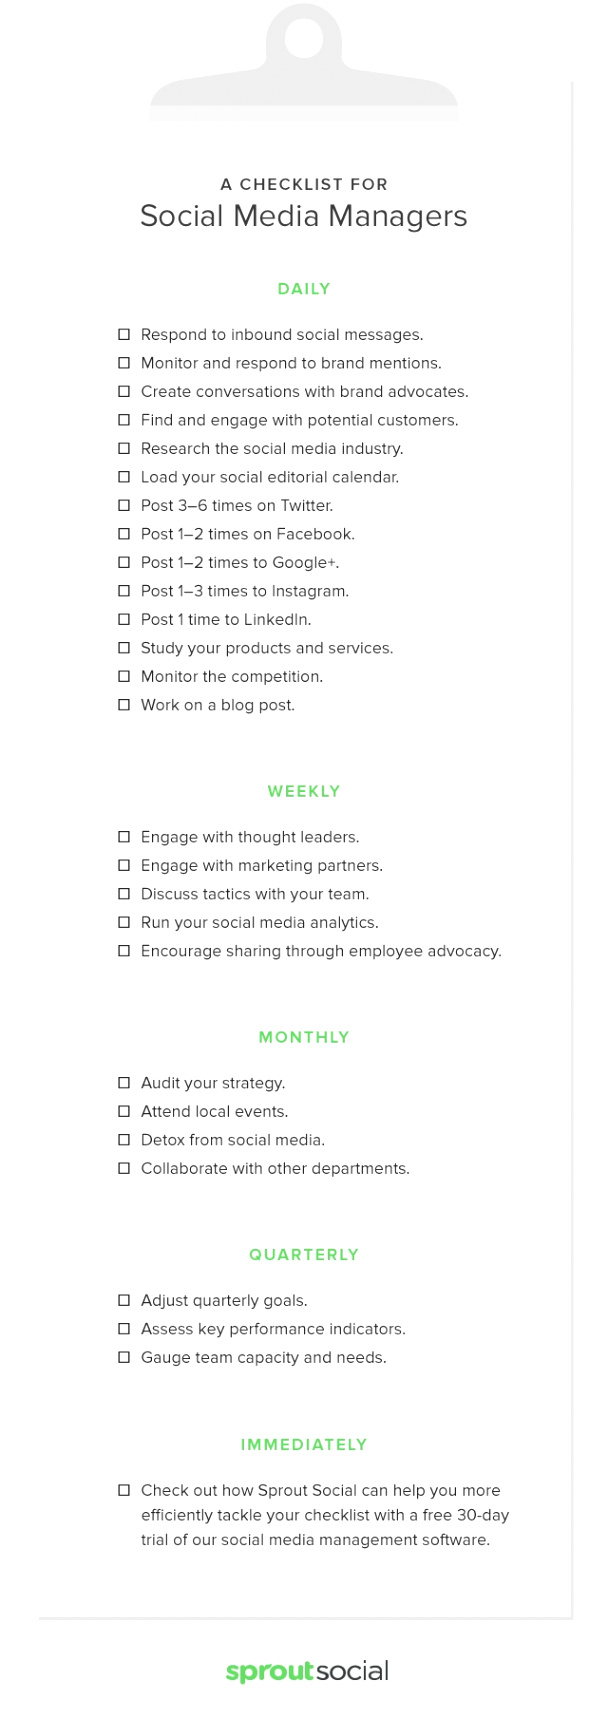 helpful checklist for social media managers